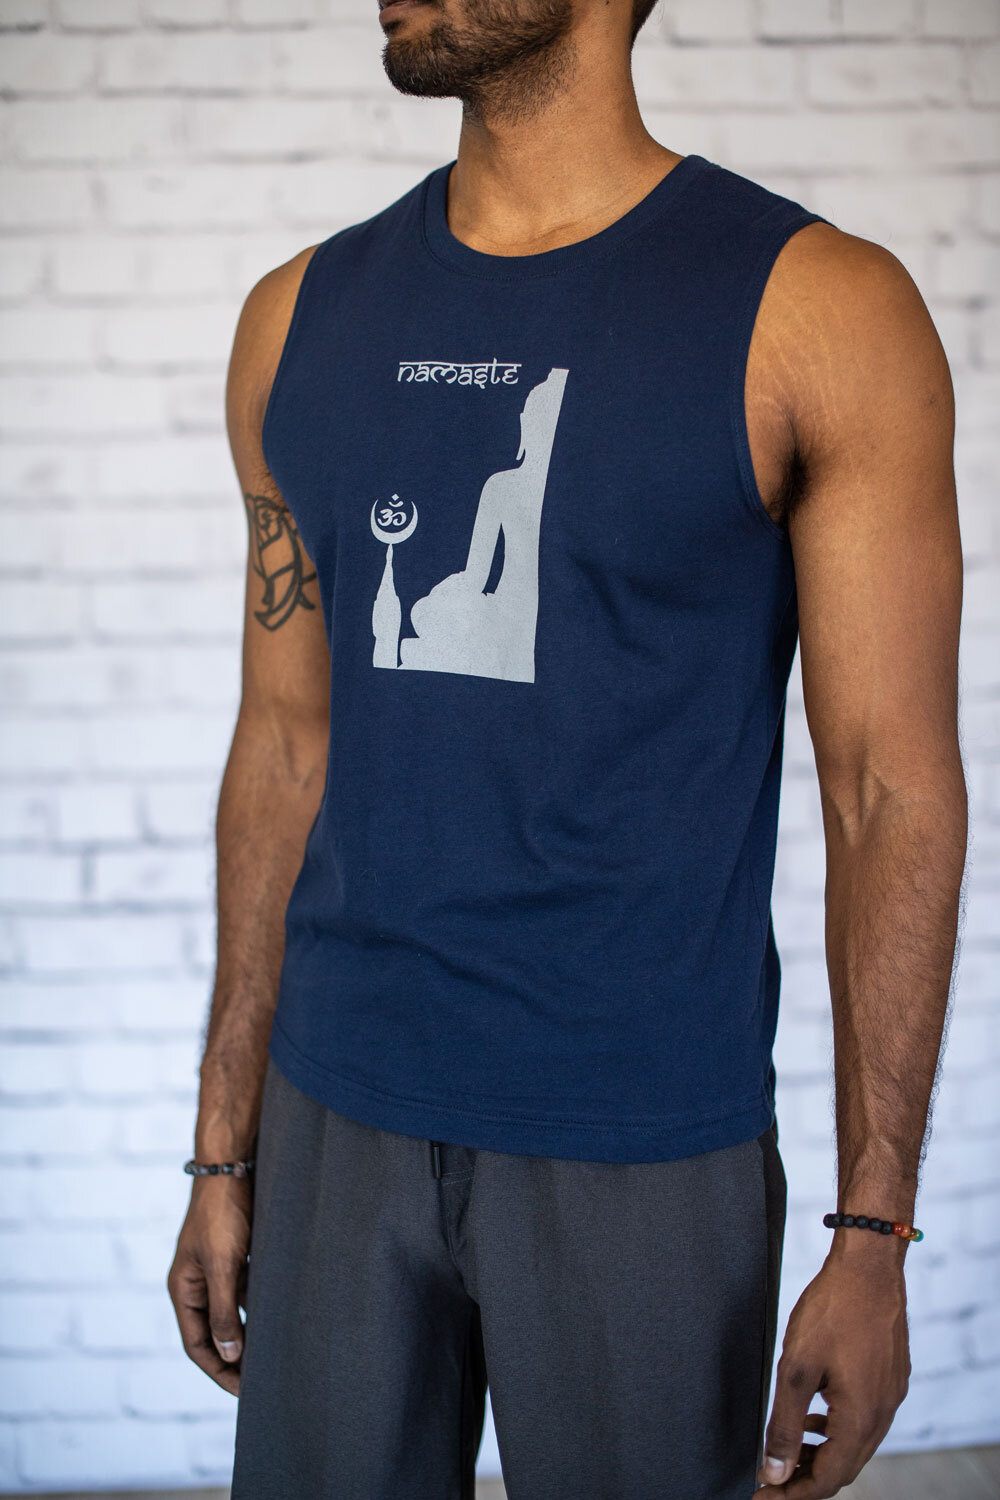 Namaste and Finish This Episode Tee/Tank Relax Exercise Design